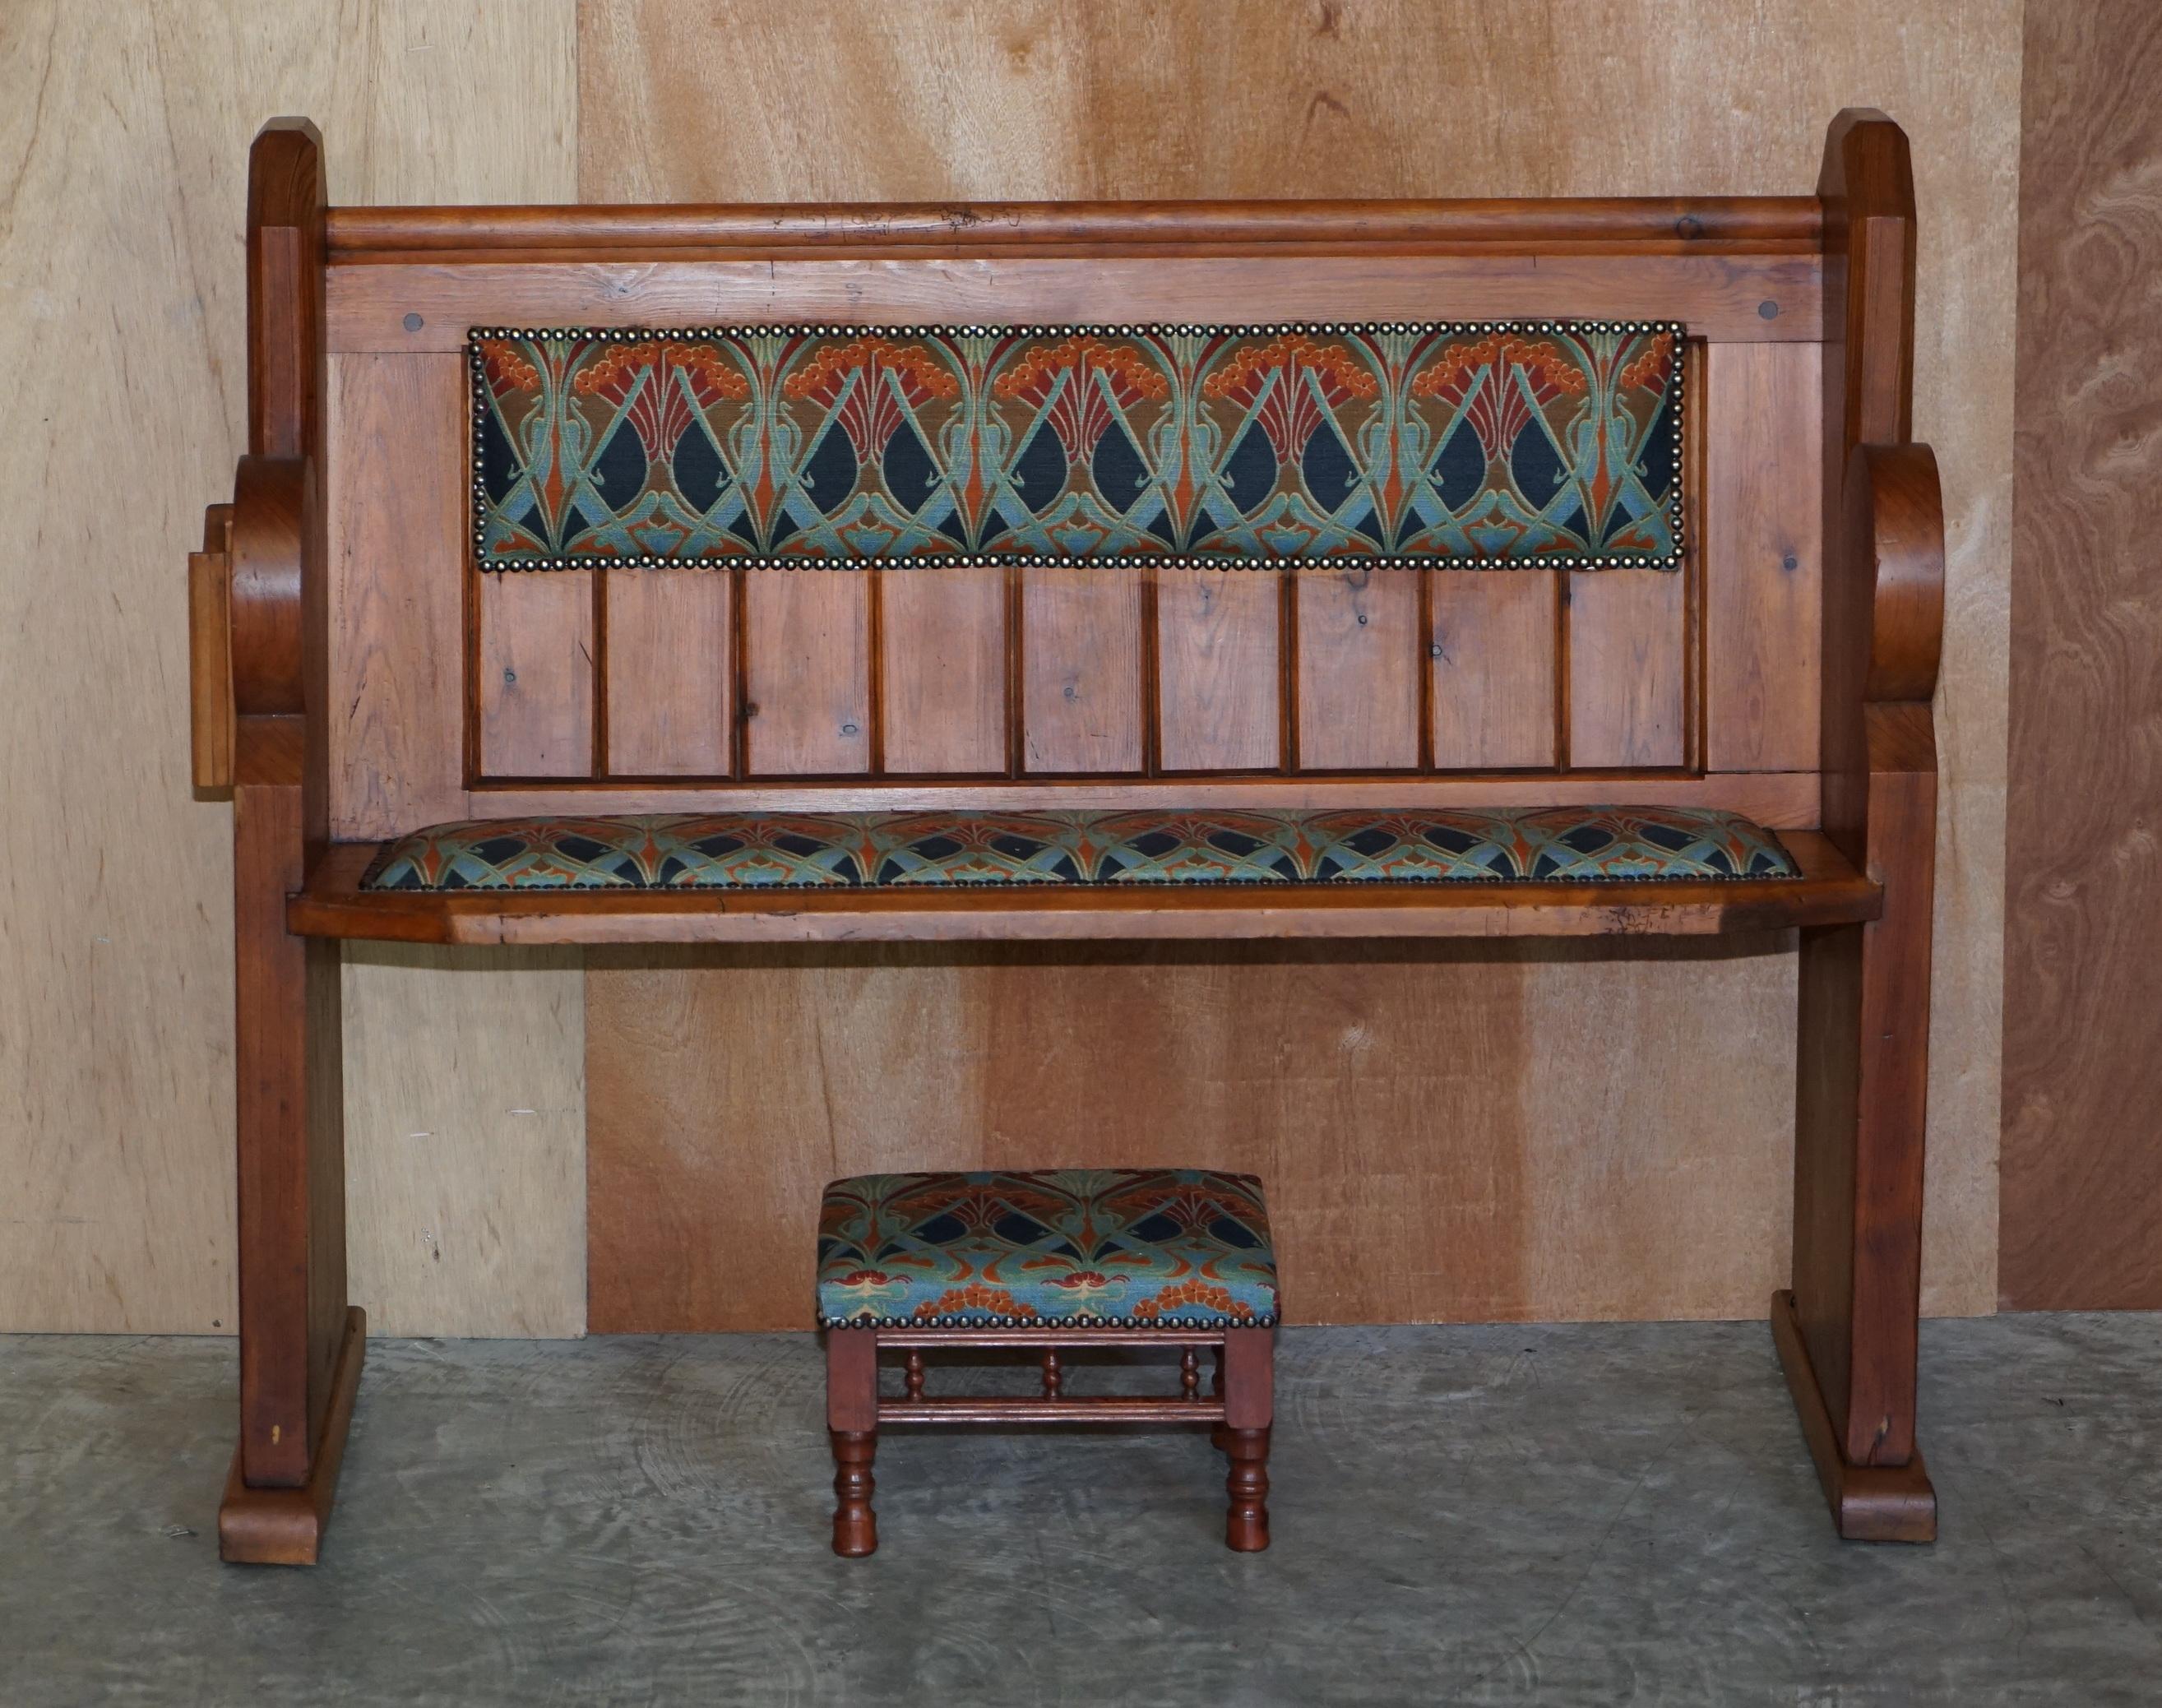 We are is delighted to offer for sale this lovely vintage Liberty’s London Ianthe upholstered pitch pine pew bench and matching footstool

A good looking and decorative suite. This was most likely made to go with a kitchen table or for a hallway,